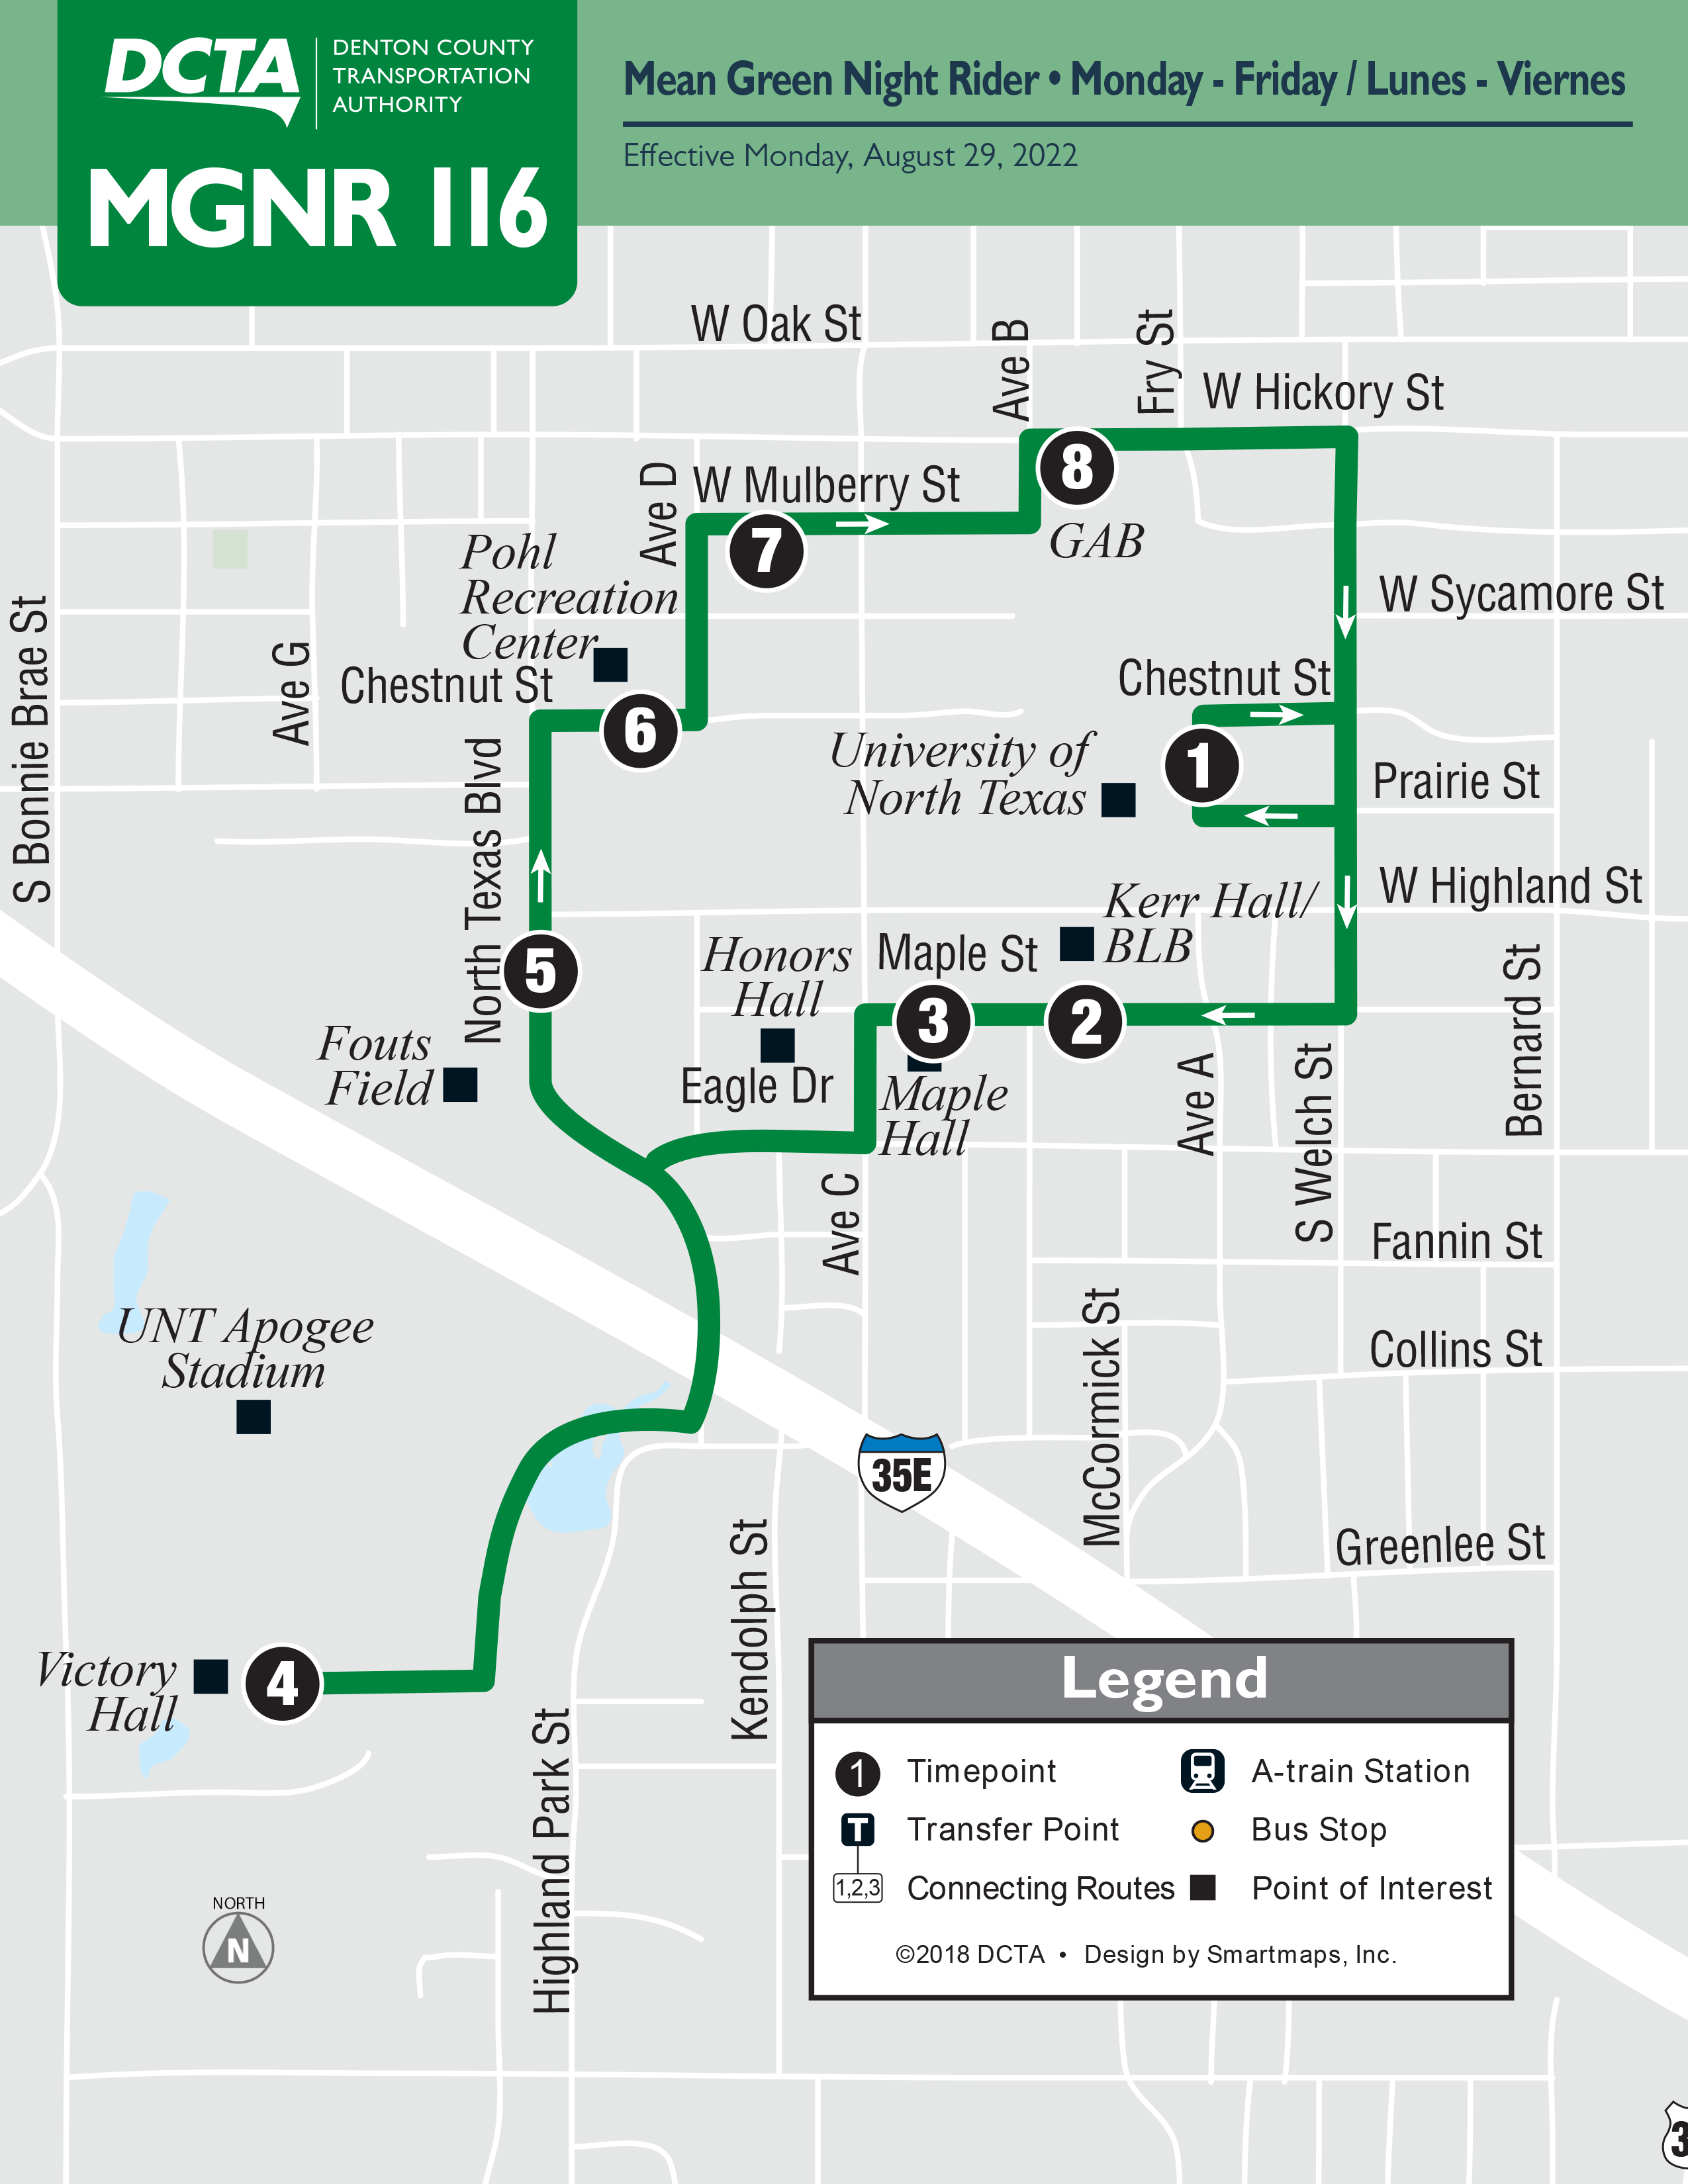 Mean Green Night Rider Route 116 Map